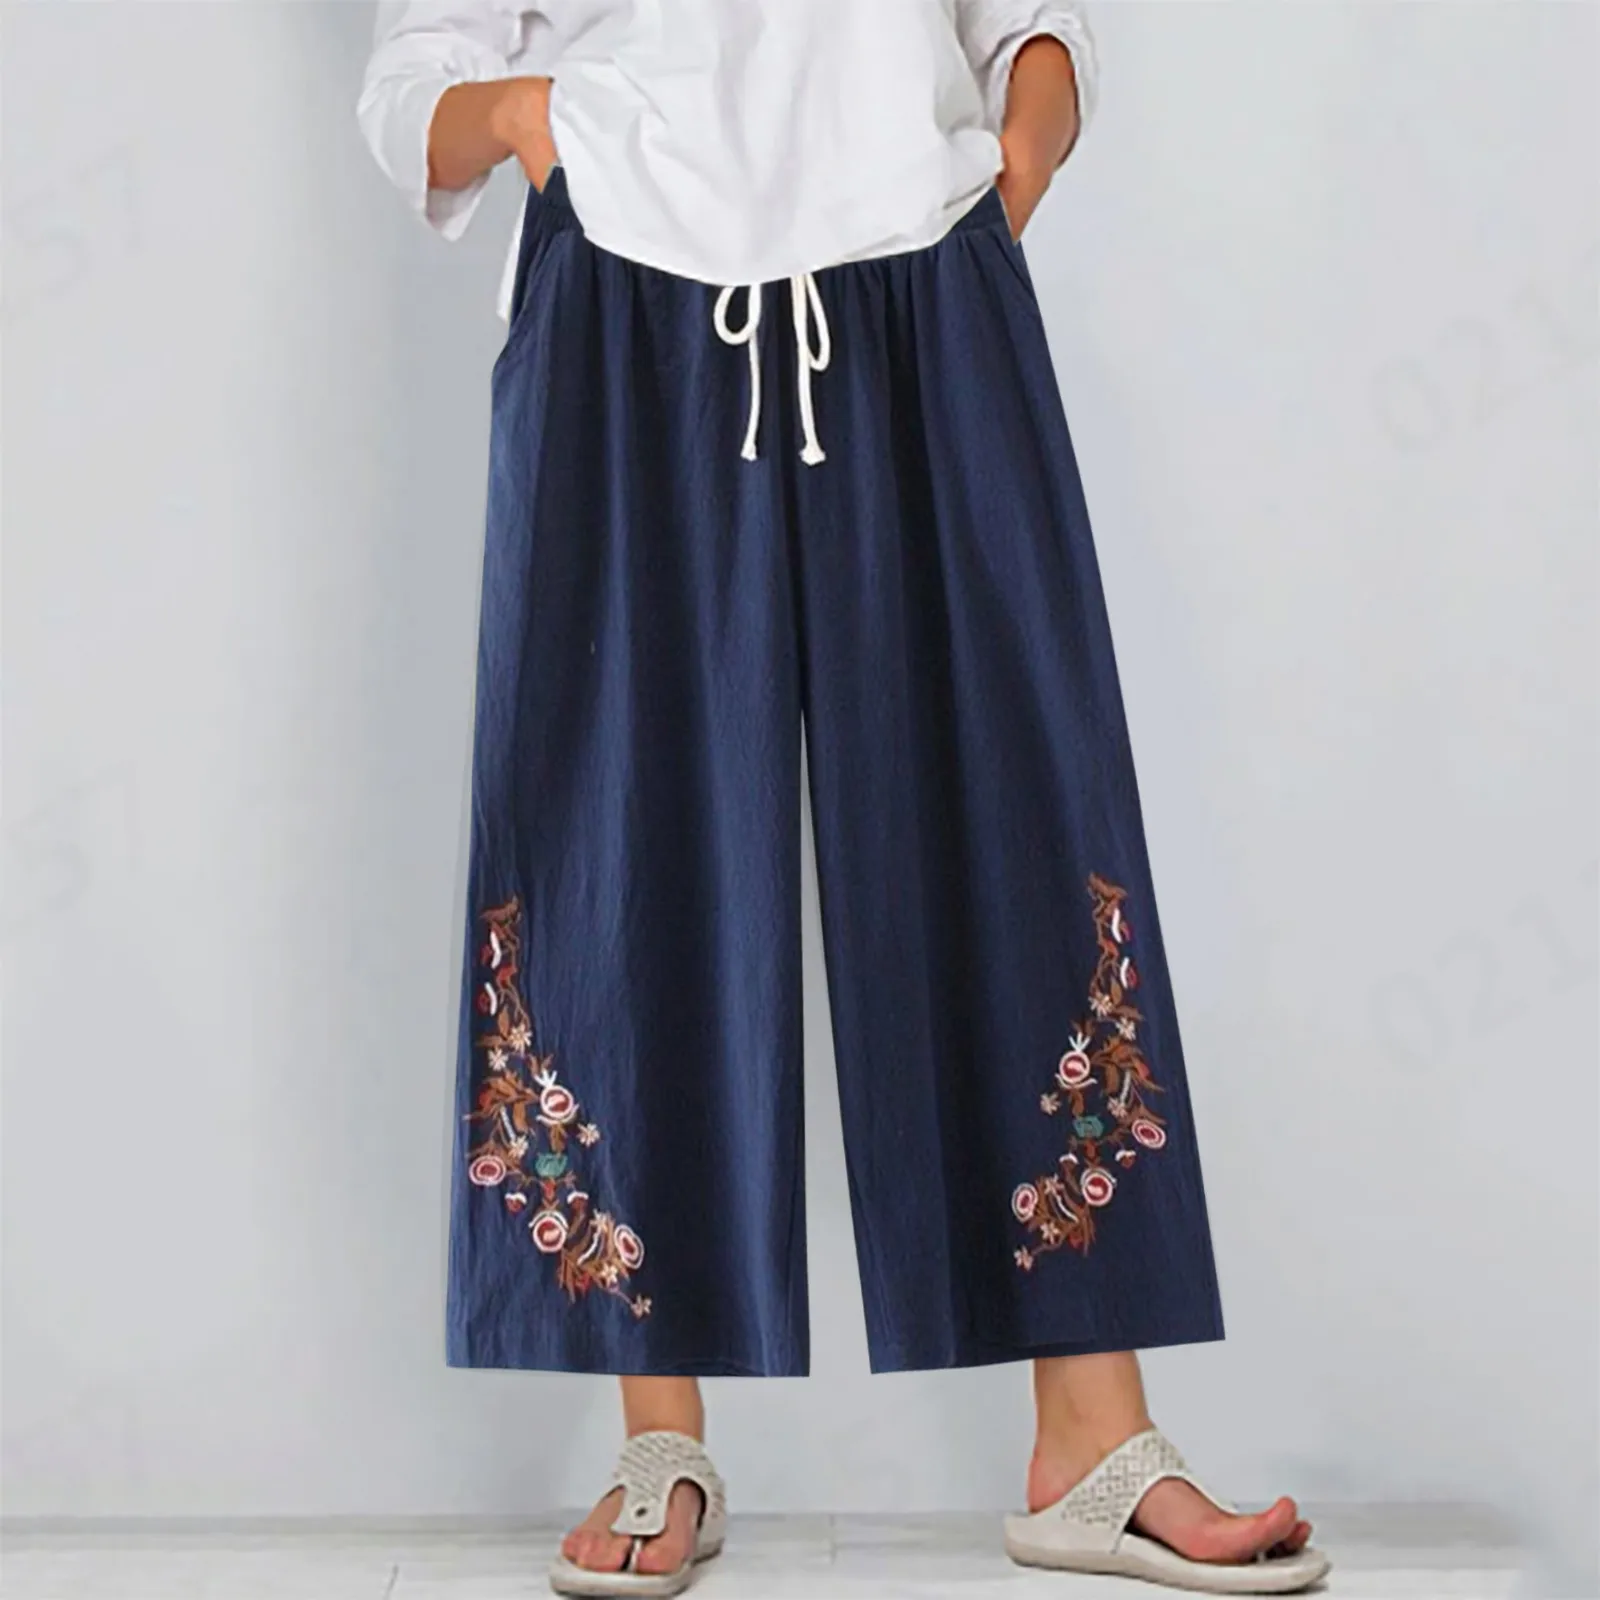 Women'S Clothing Elastic Waist Embroidery Pockets Spliced Loose Solid Casual Cotton Summer Fashion Elegant Wide Leg Pants Simple